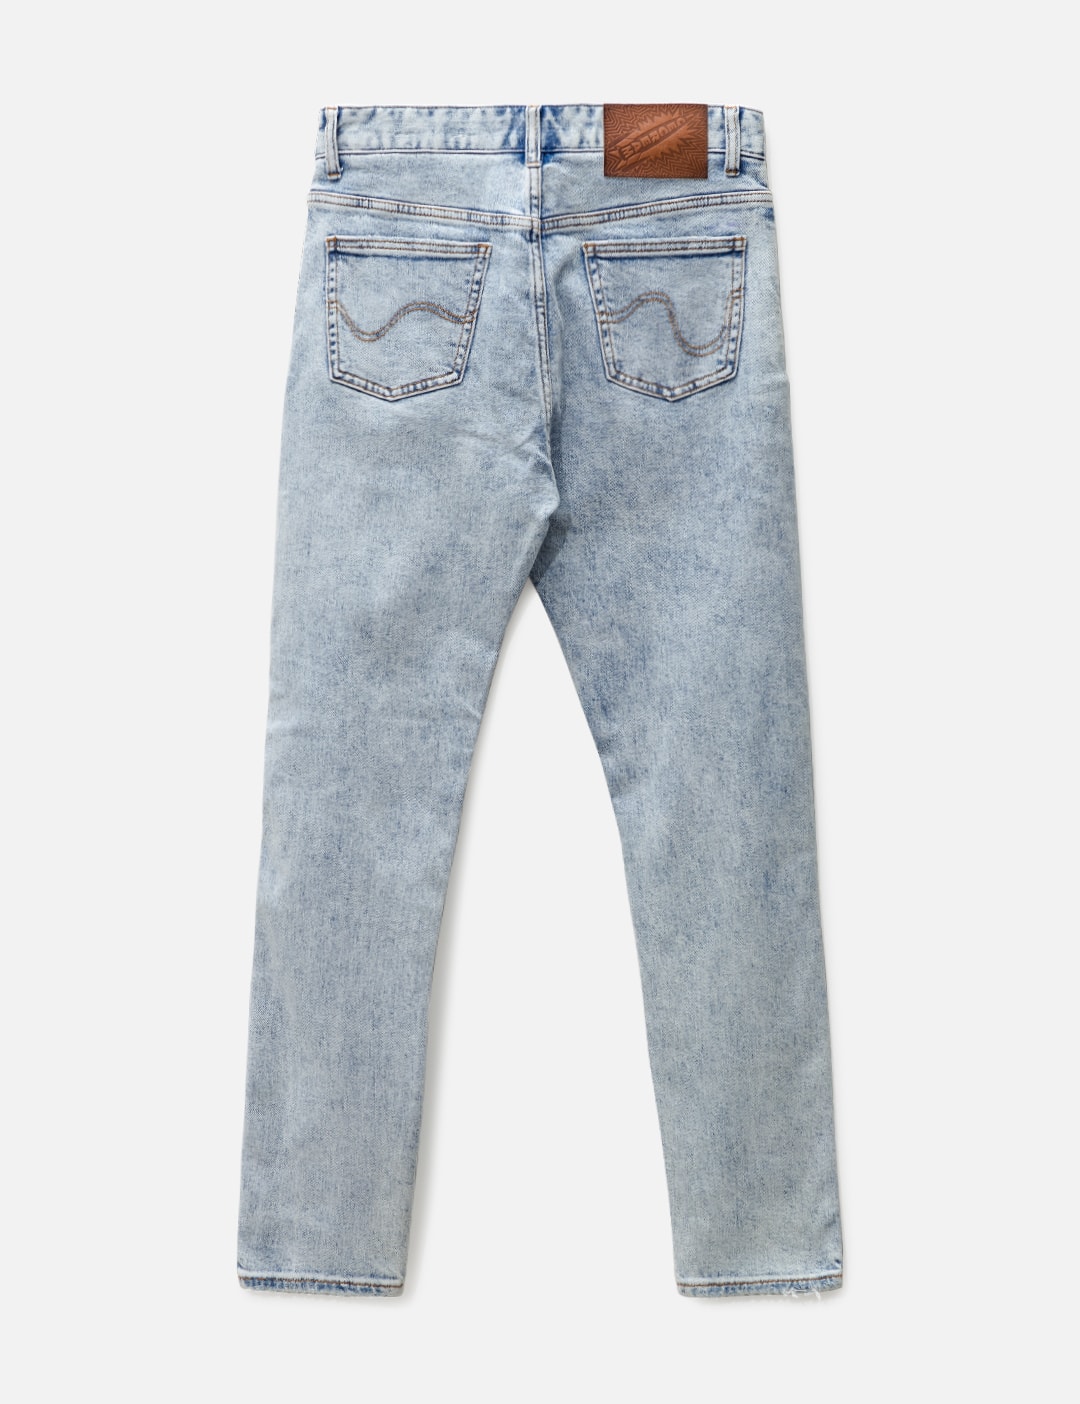 Icecream - Cone Jeans | HBX - Globally Curated Fashion and Lifestyle by ...